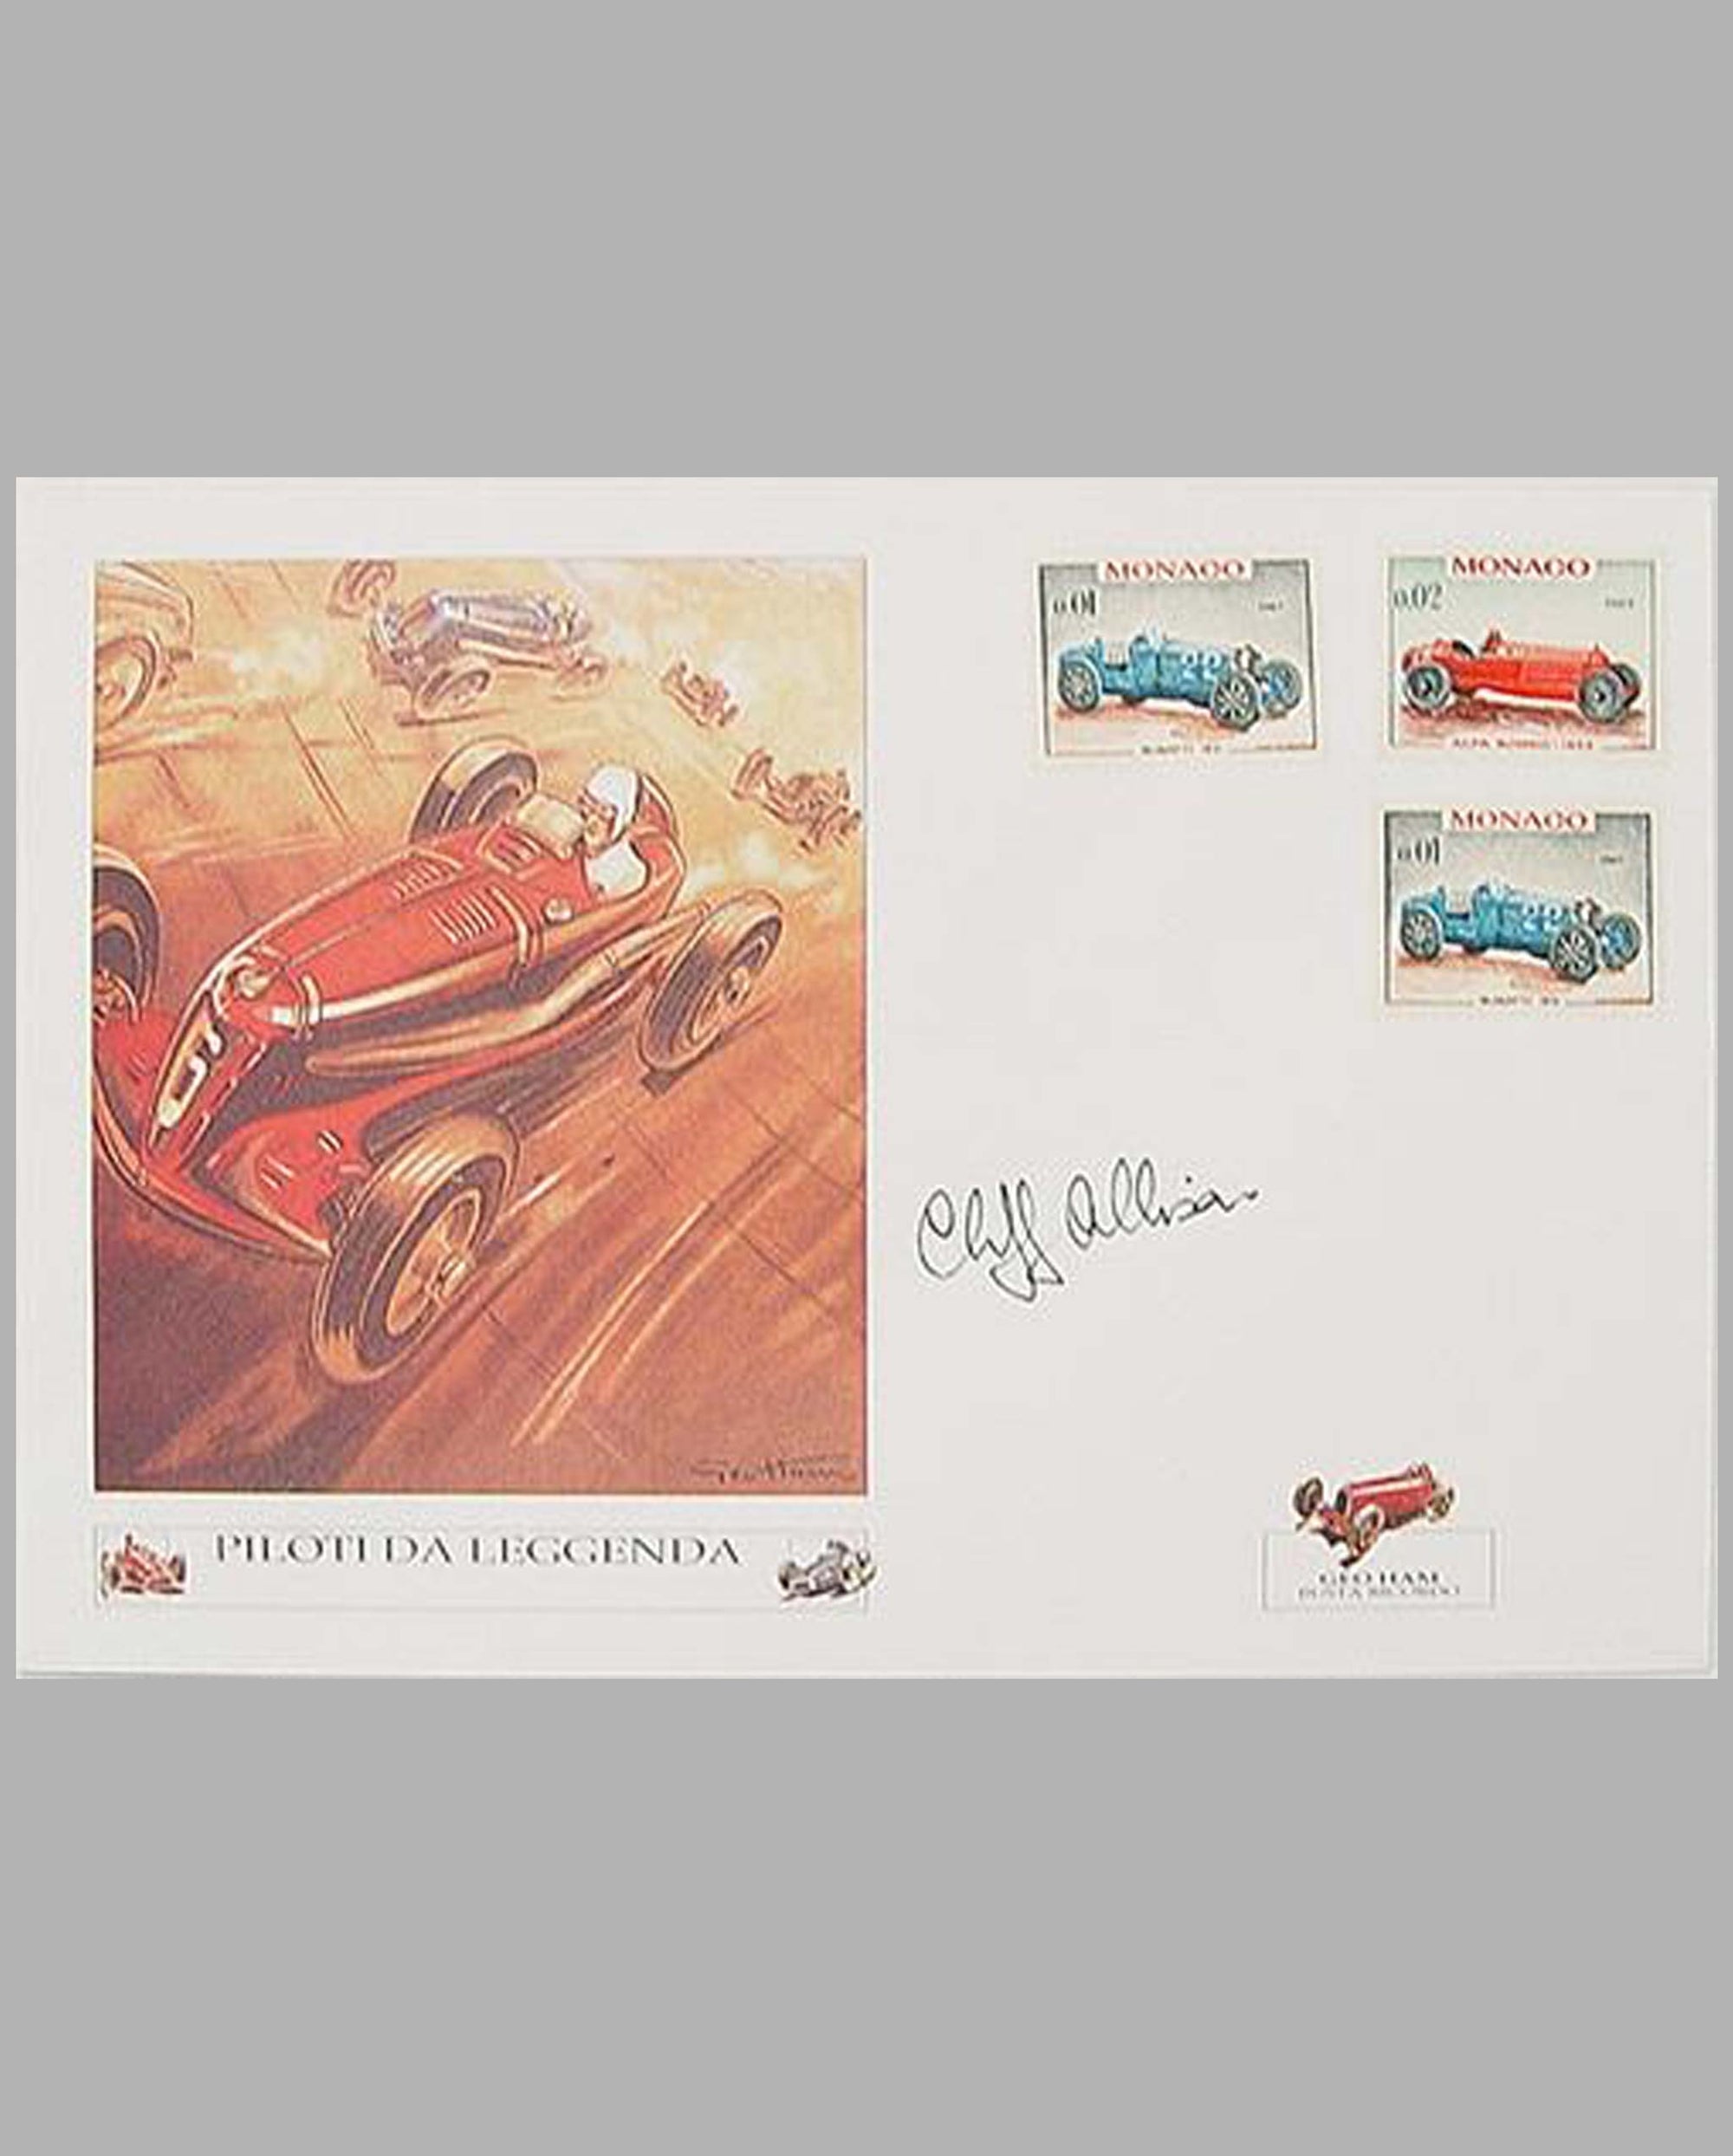 Italian Race Car print on envelope by Geo Ham, autographed by Cliff Allison